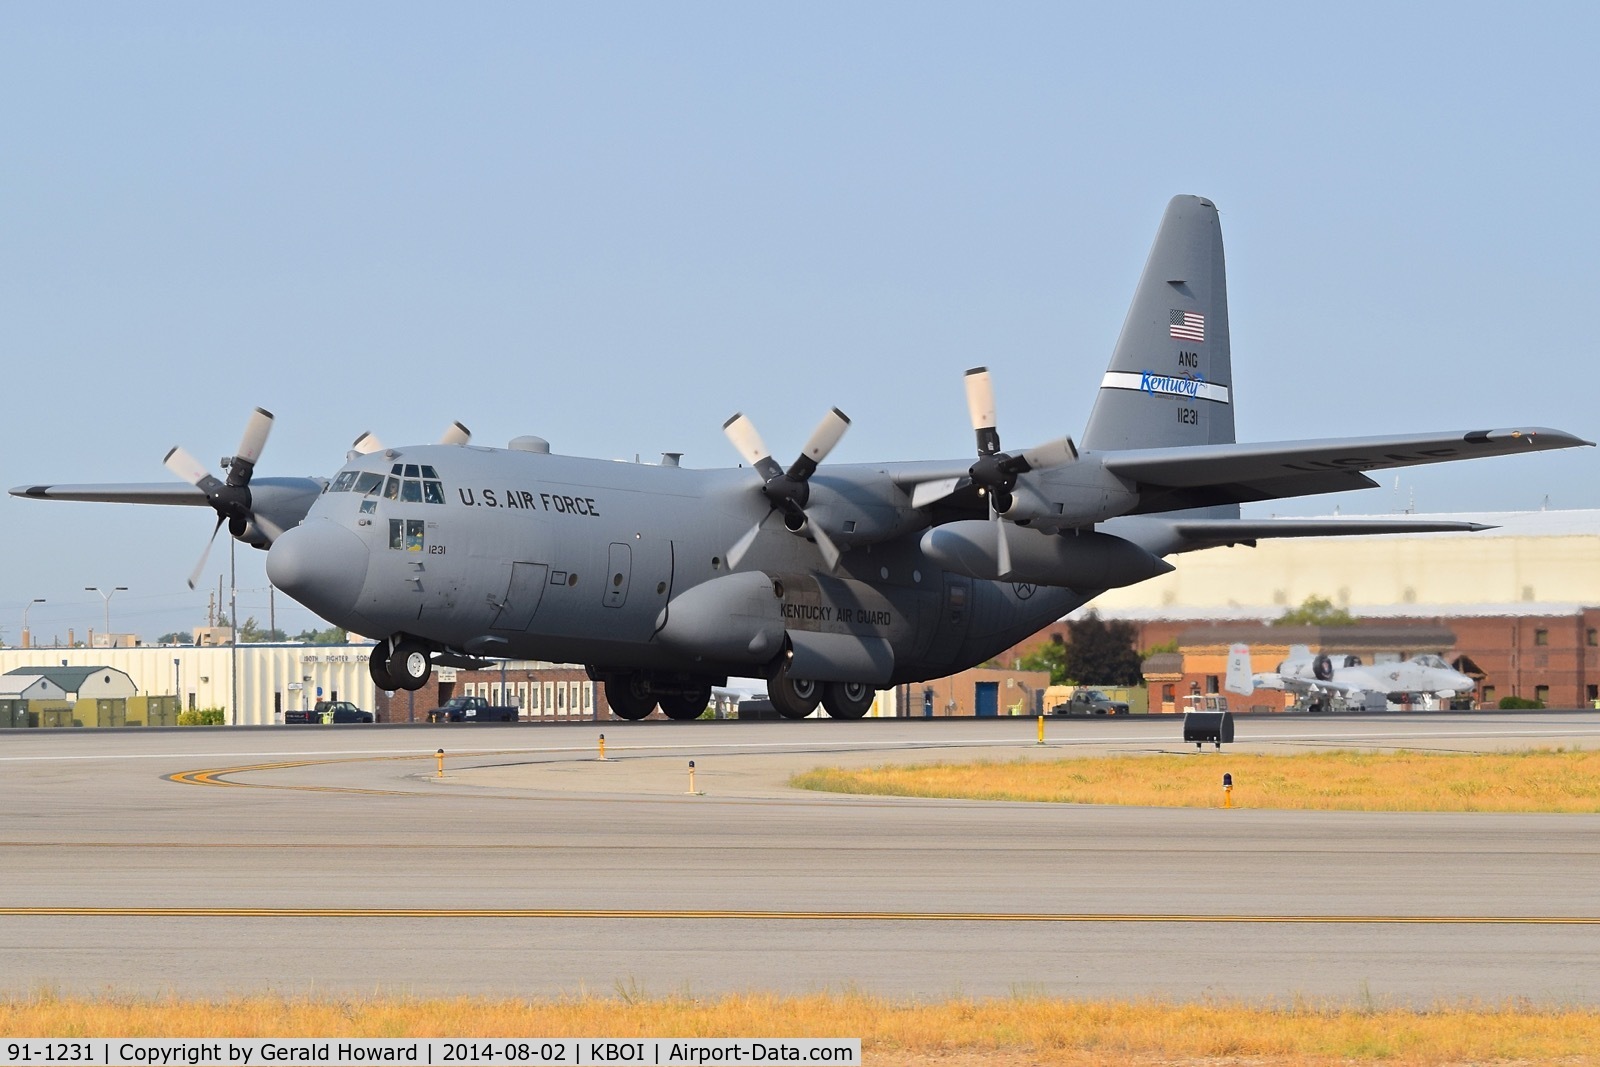 91-1231, 1992 Lockheed C-130H Hercules C/N 382-5278, Take off roll on RWY 10R.  123rd Airlift Wing, Kentucky ANG.